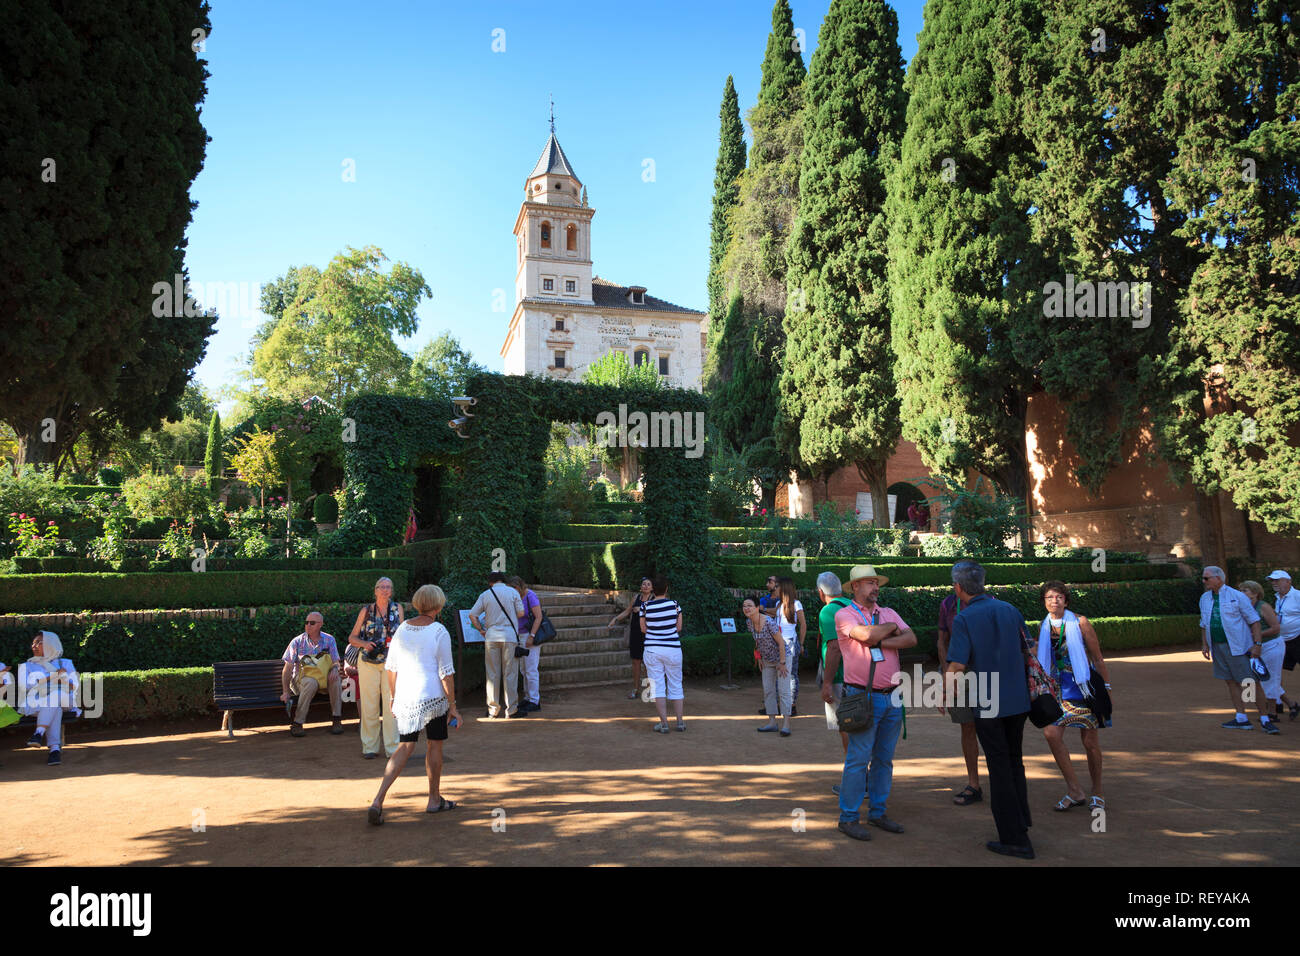 Tourists in the gardens in front of the Church of Saint Maria of Alhambra Stock Photo